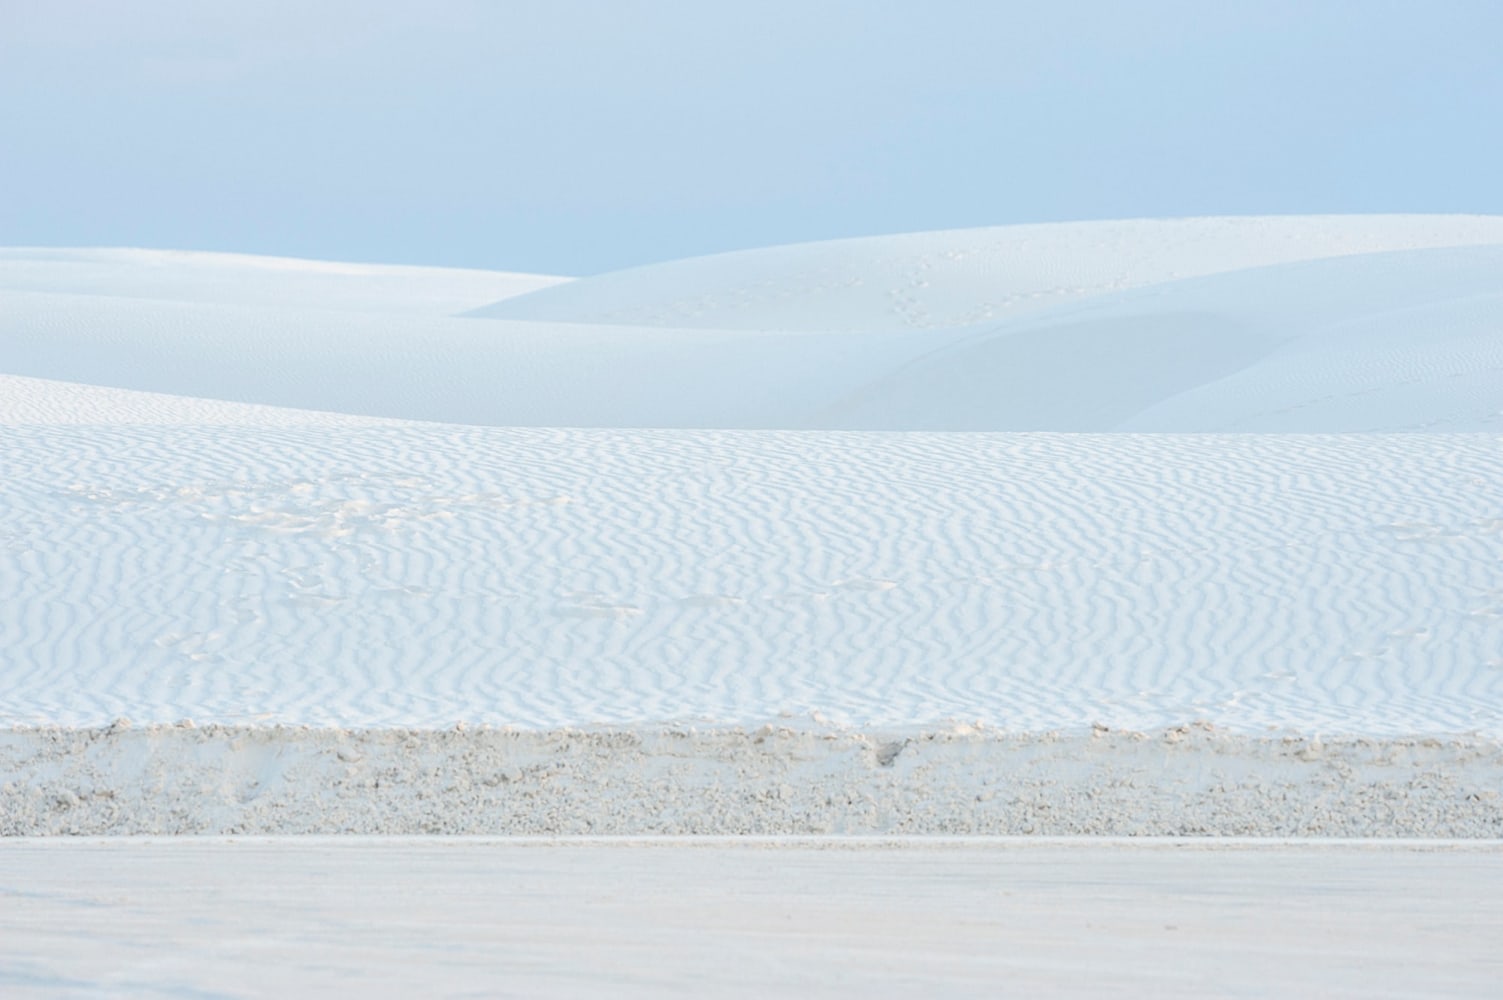 Renate Aller

Plate 79, White Sand Dunes, New Mexico, 2012

Archival pigment print

40h x 60w in

Framed: 47h x 67w in

1/5

RA032